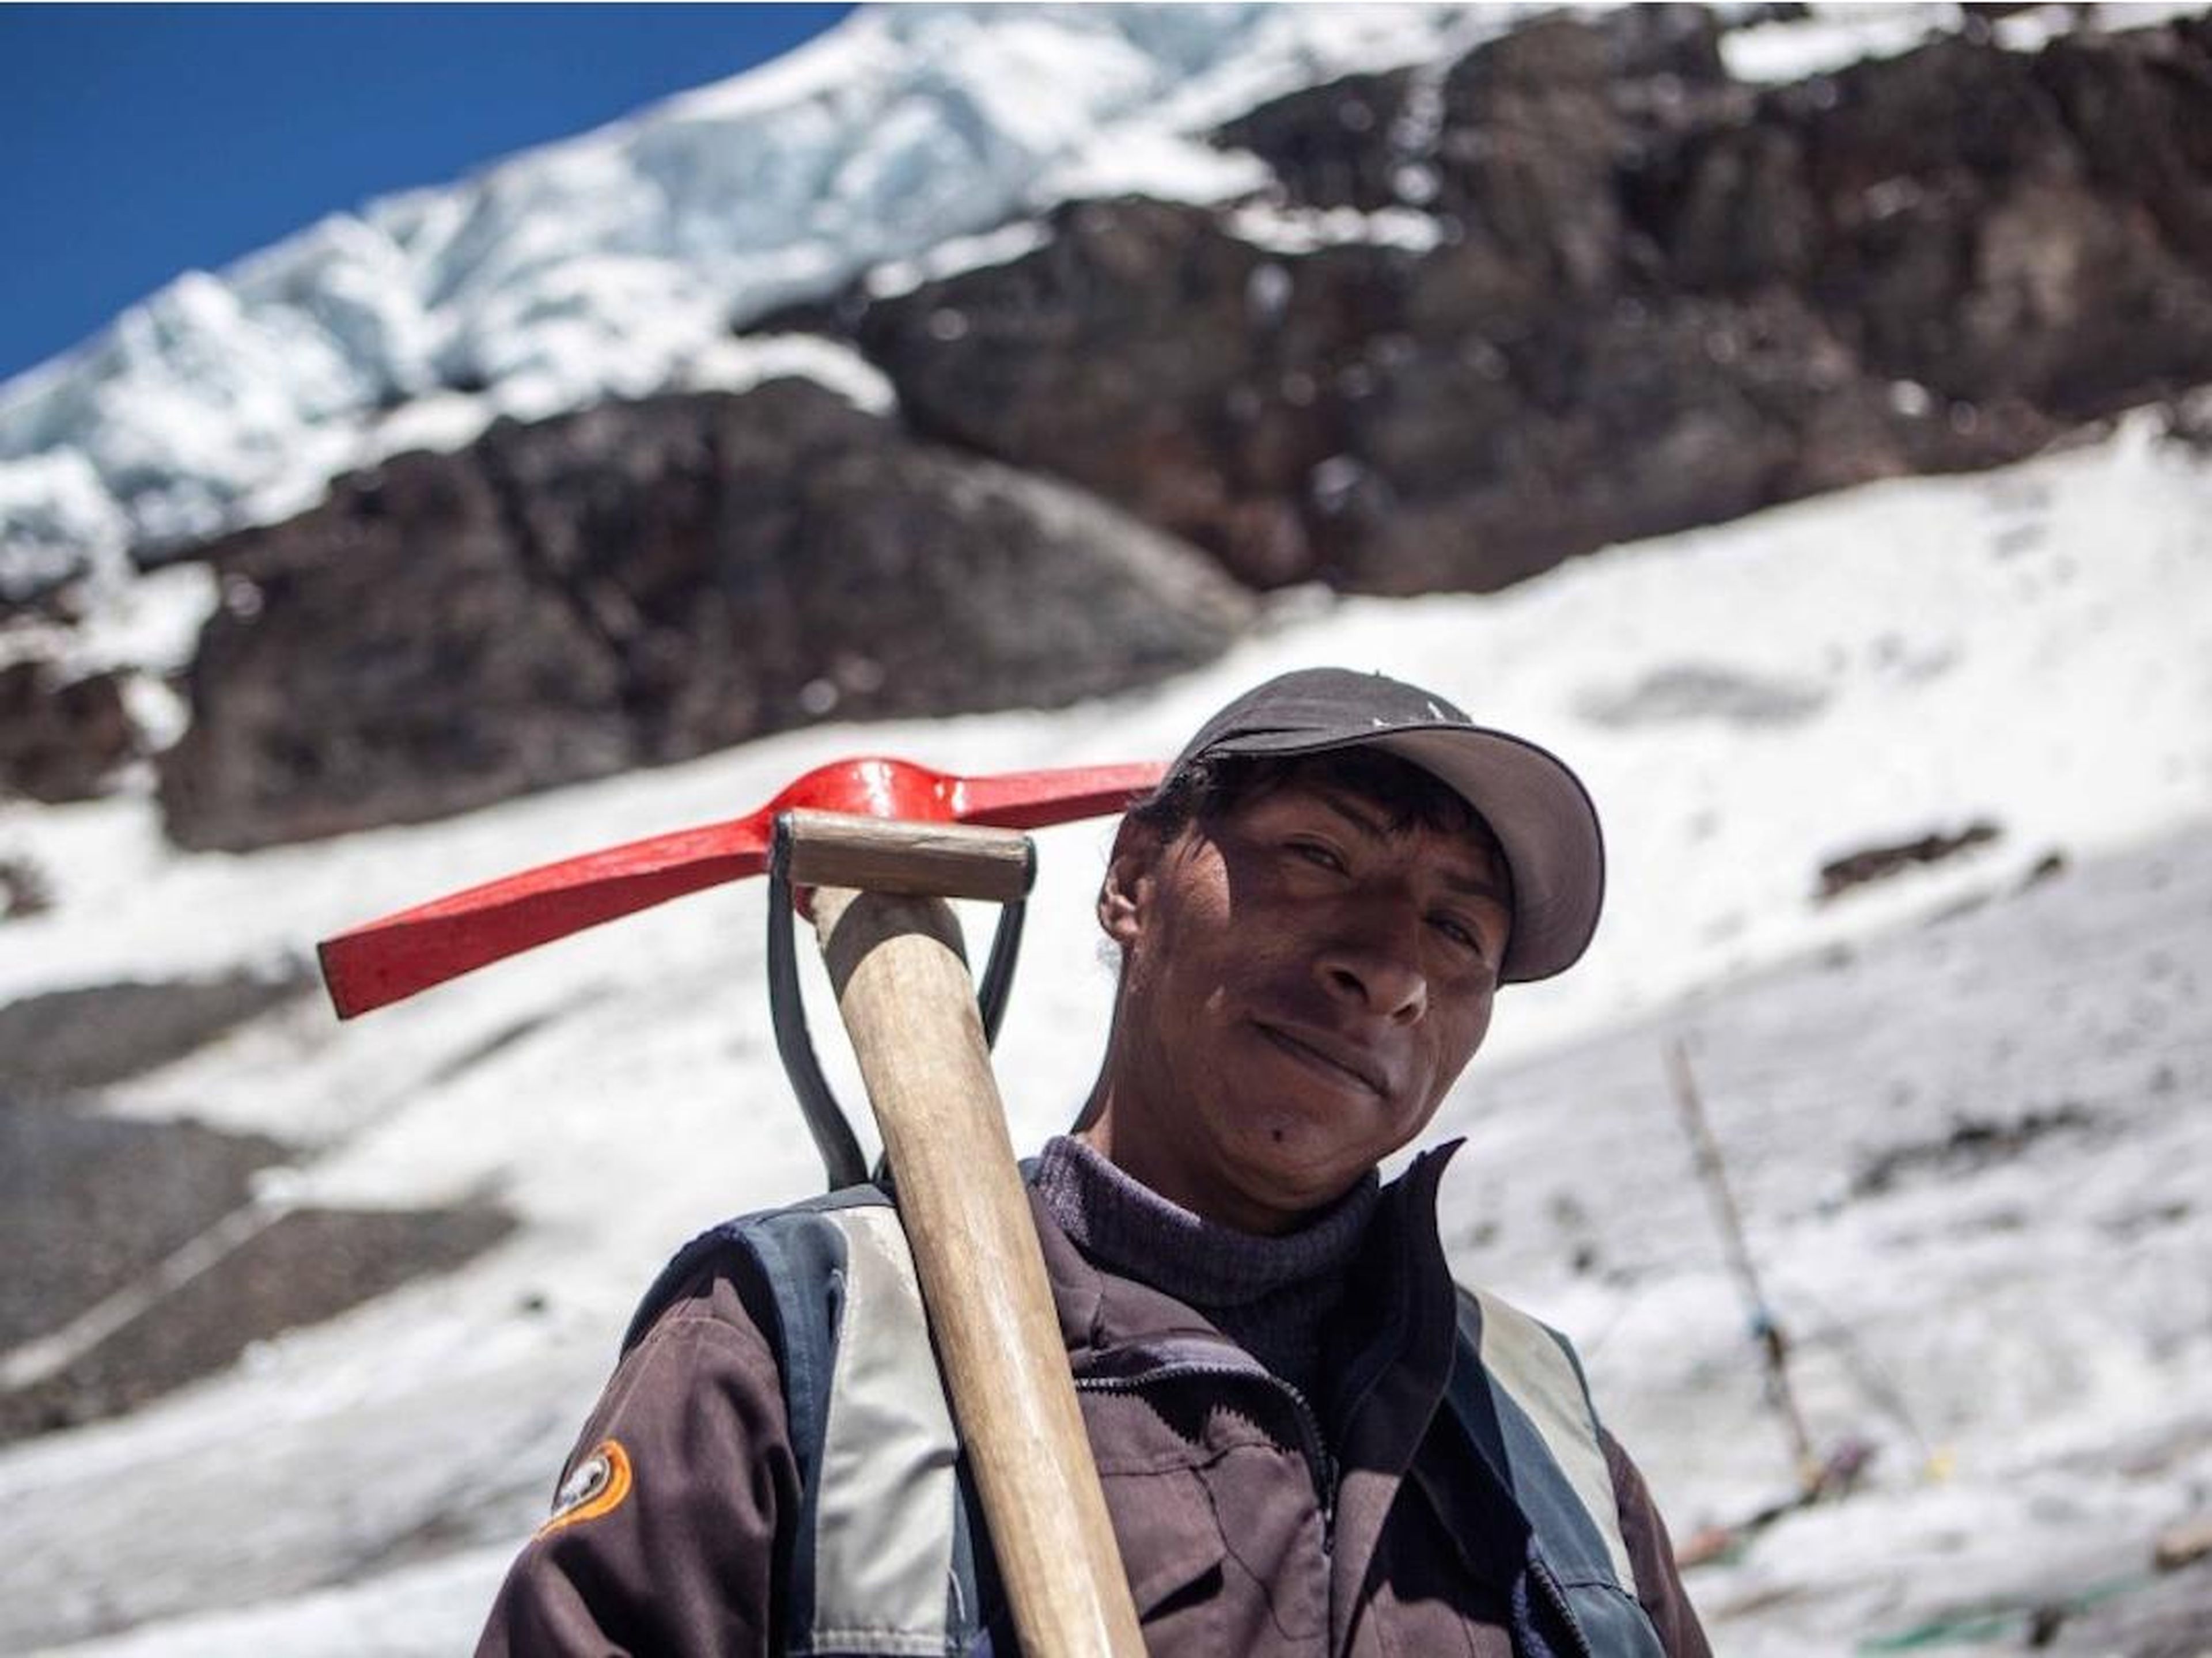 Much of the population is made up of optimistic Peruvians who fancied their luck striking it rich in the gold mines. Miners here don't receive a traditional paycheck. Instead, they can lay claim to any gold they find on the last